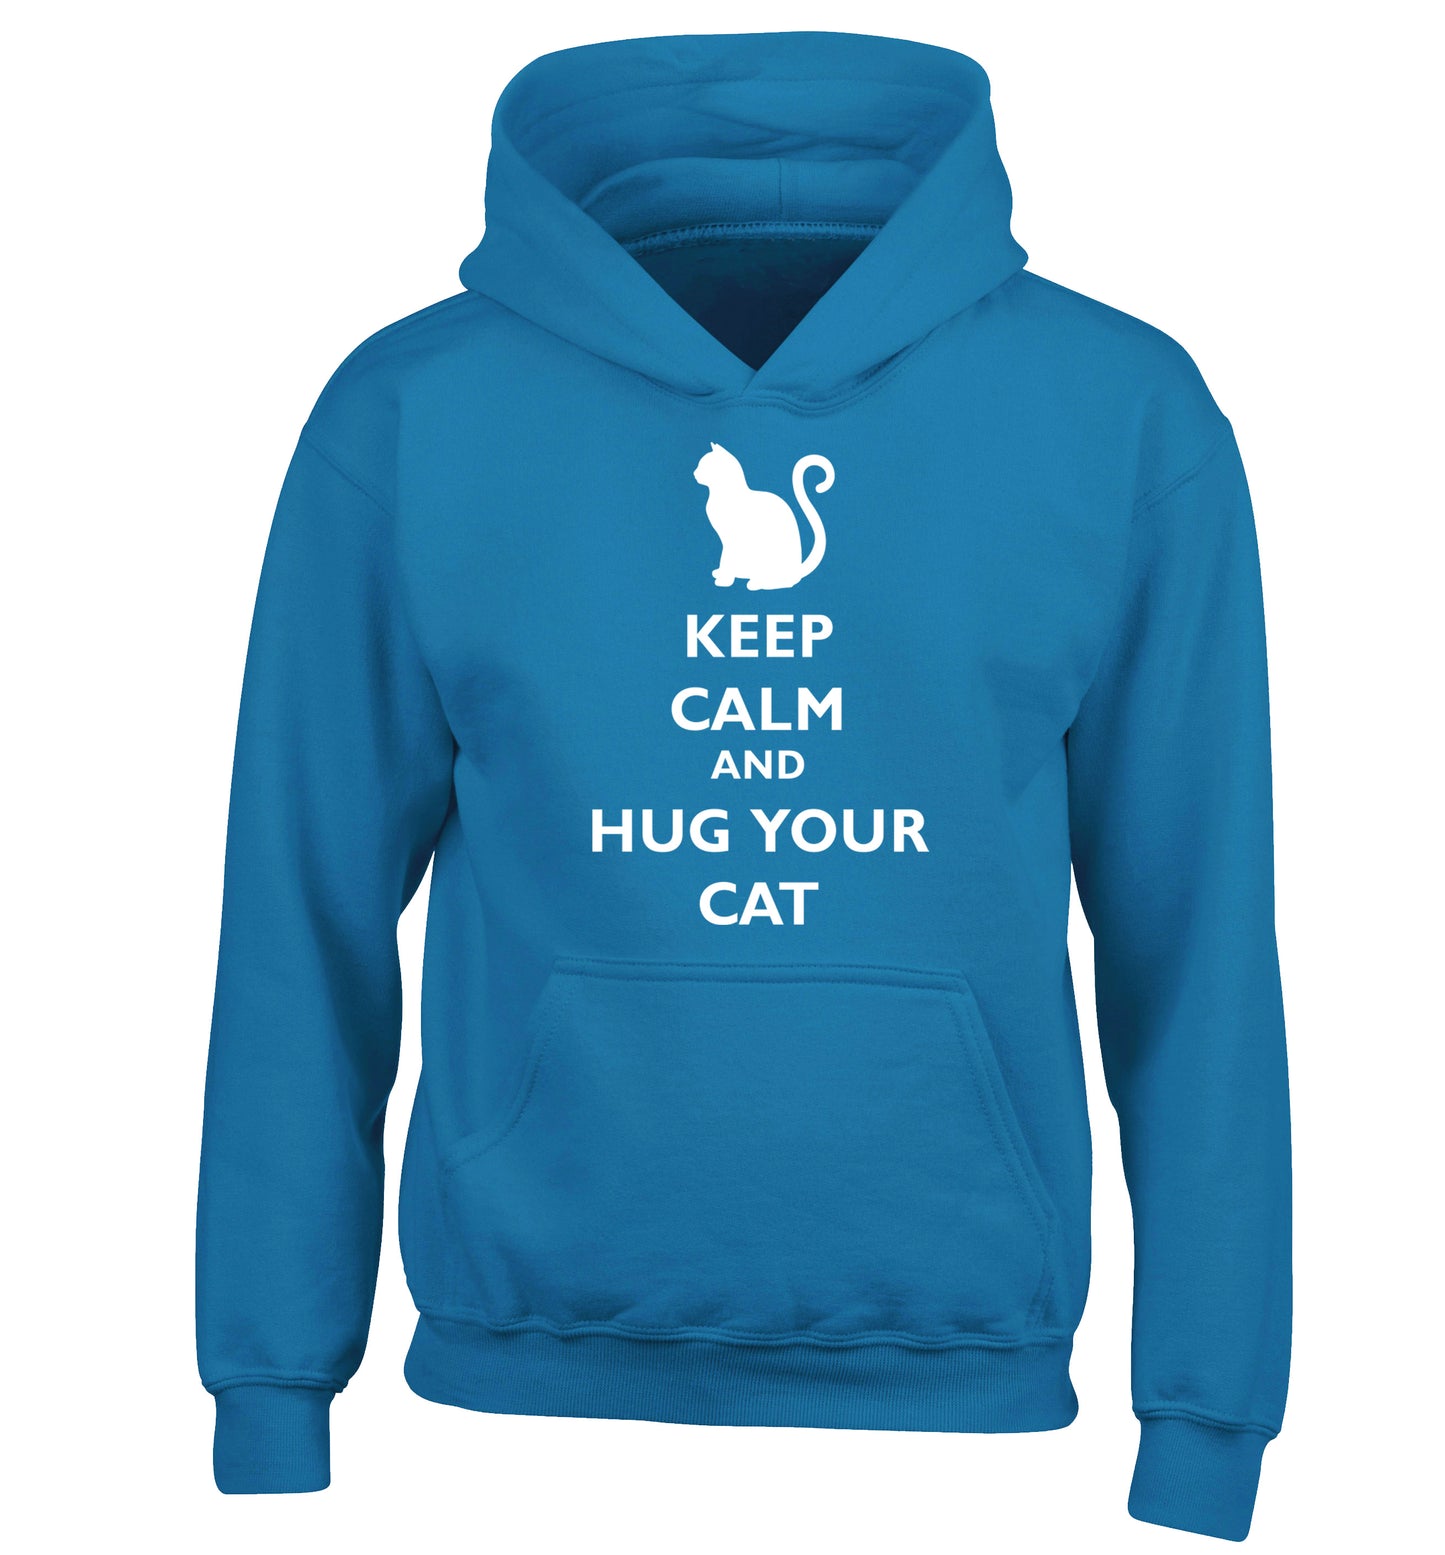 Keep calm and hug your cat children's blue hoodie 12-13 Years